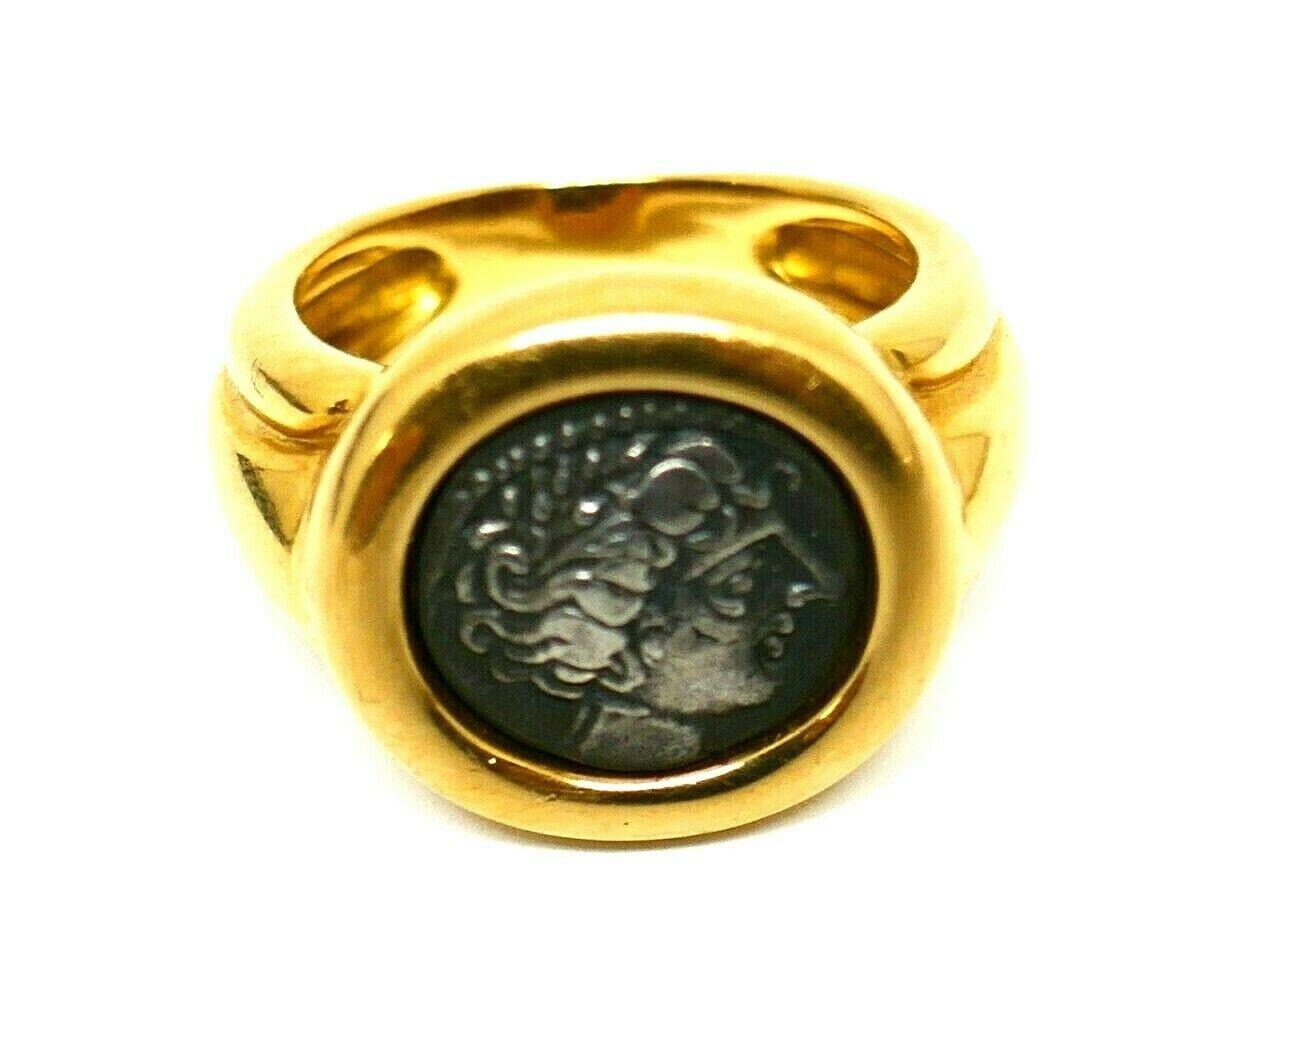 Ancient coin ring made of 18k yellow gold by Fred (Paris). 
The ring size is 7, weight is 13.9 grams. The coin diameter is 1/4